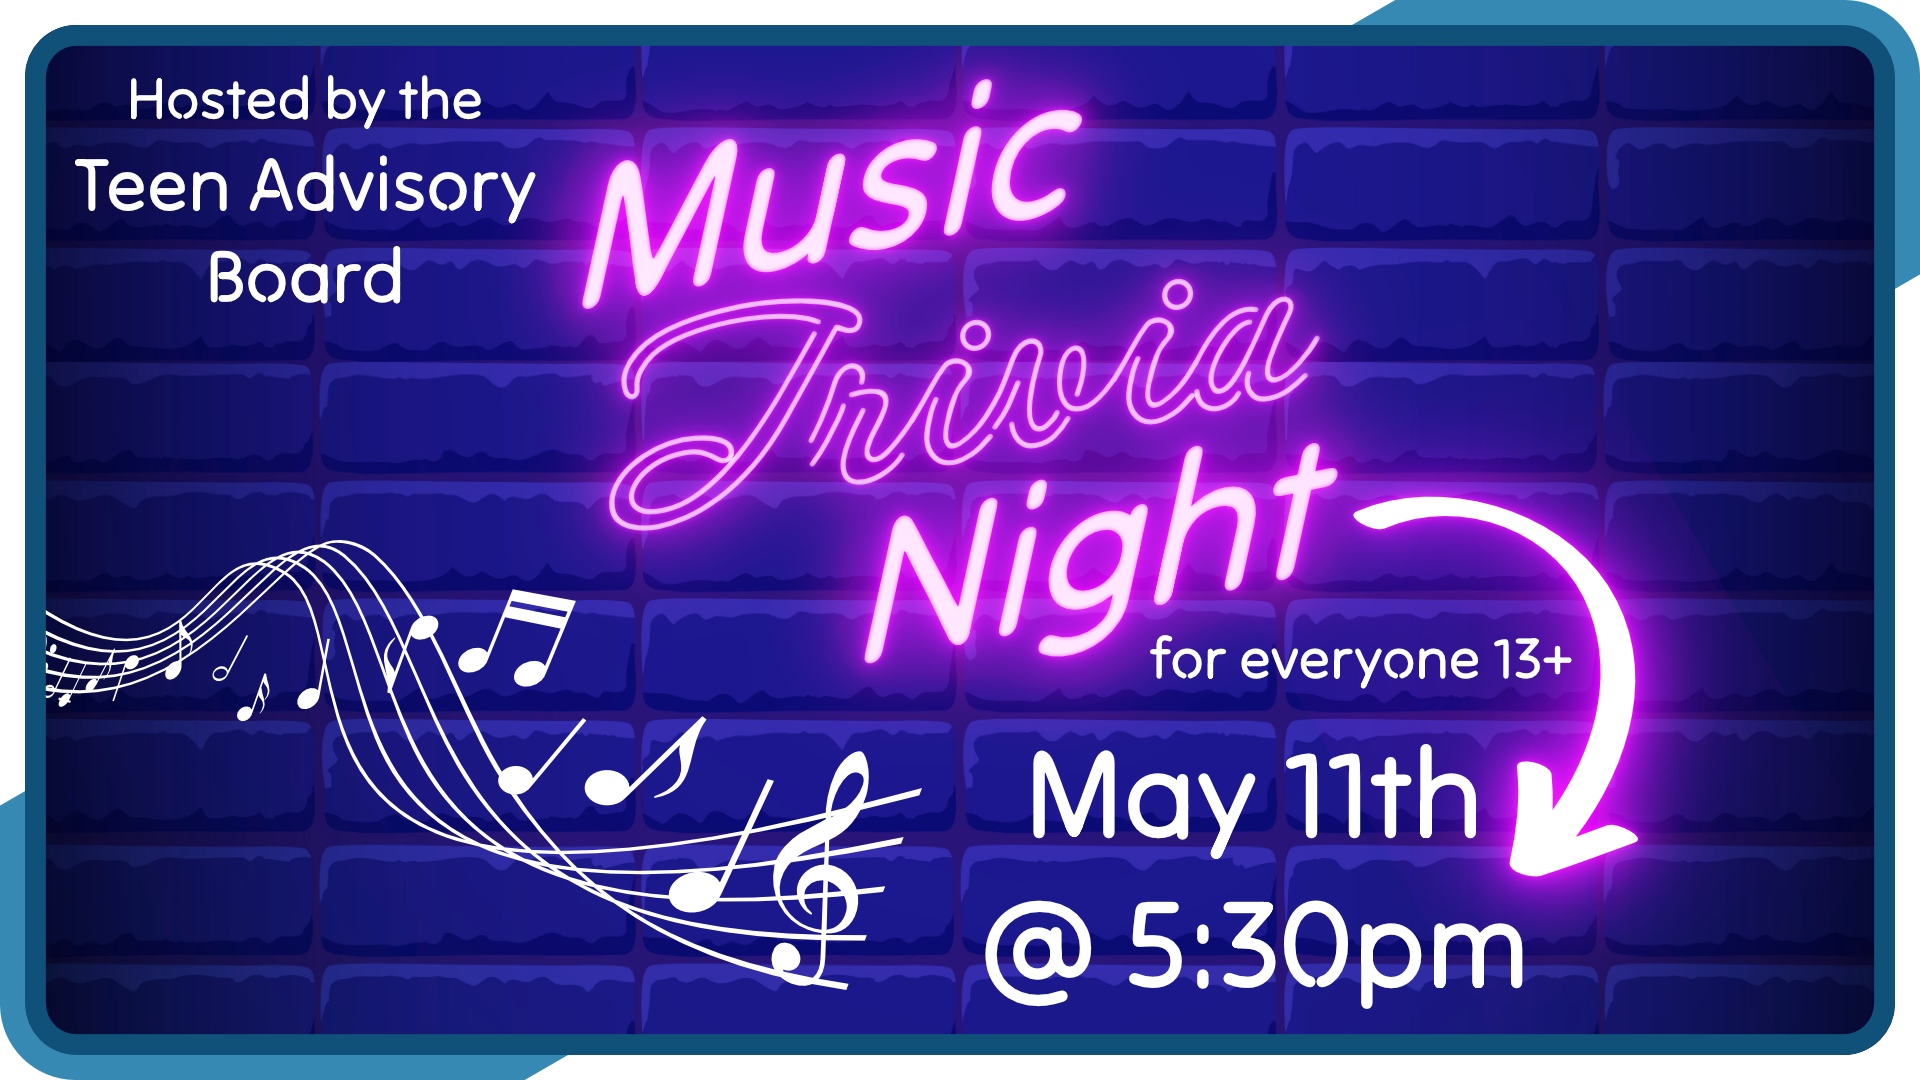 Music Trivia Night, May 11th at 5:30pm, hosted by the Teen Advisory Board